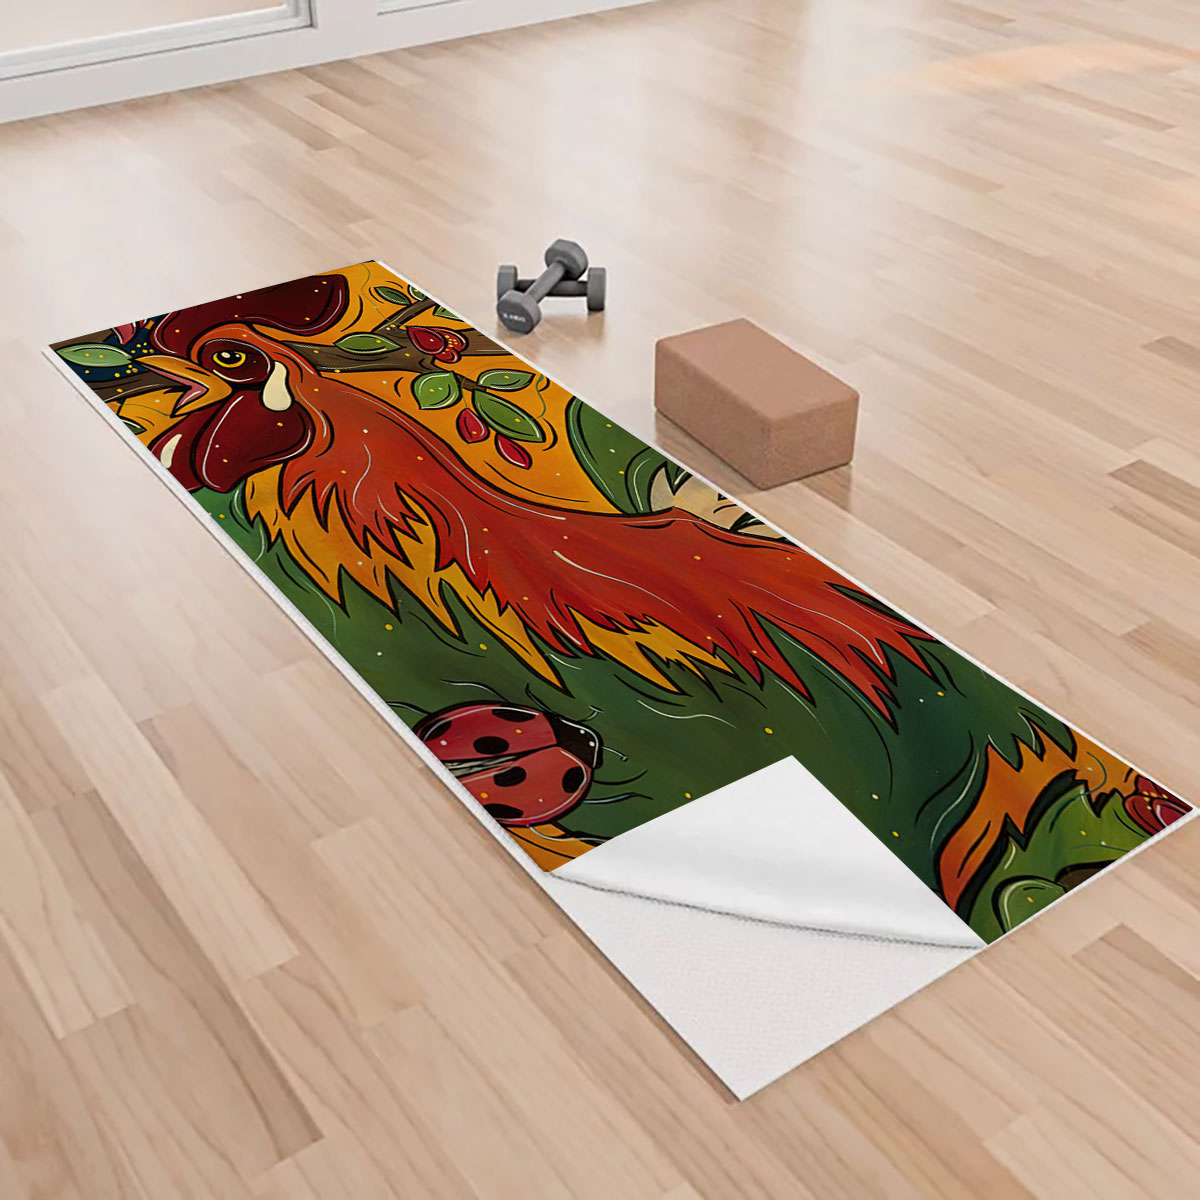 Chicken And Trees Yoga Towels